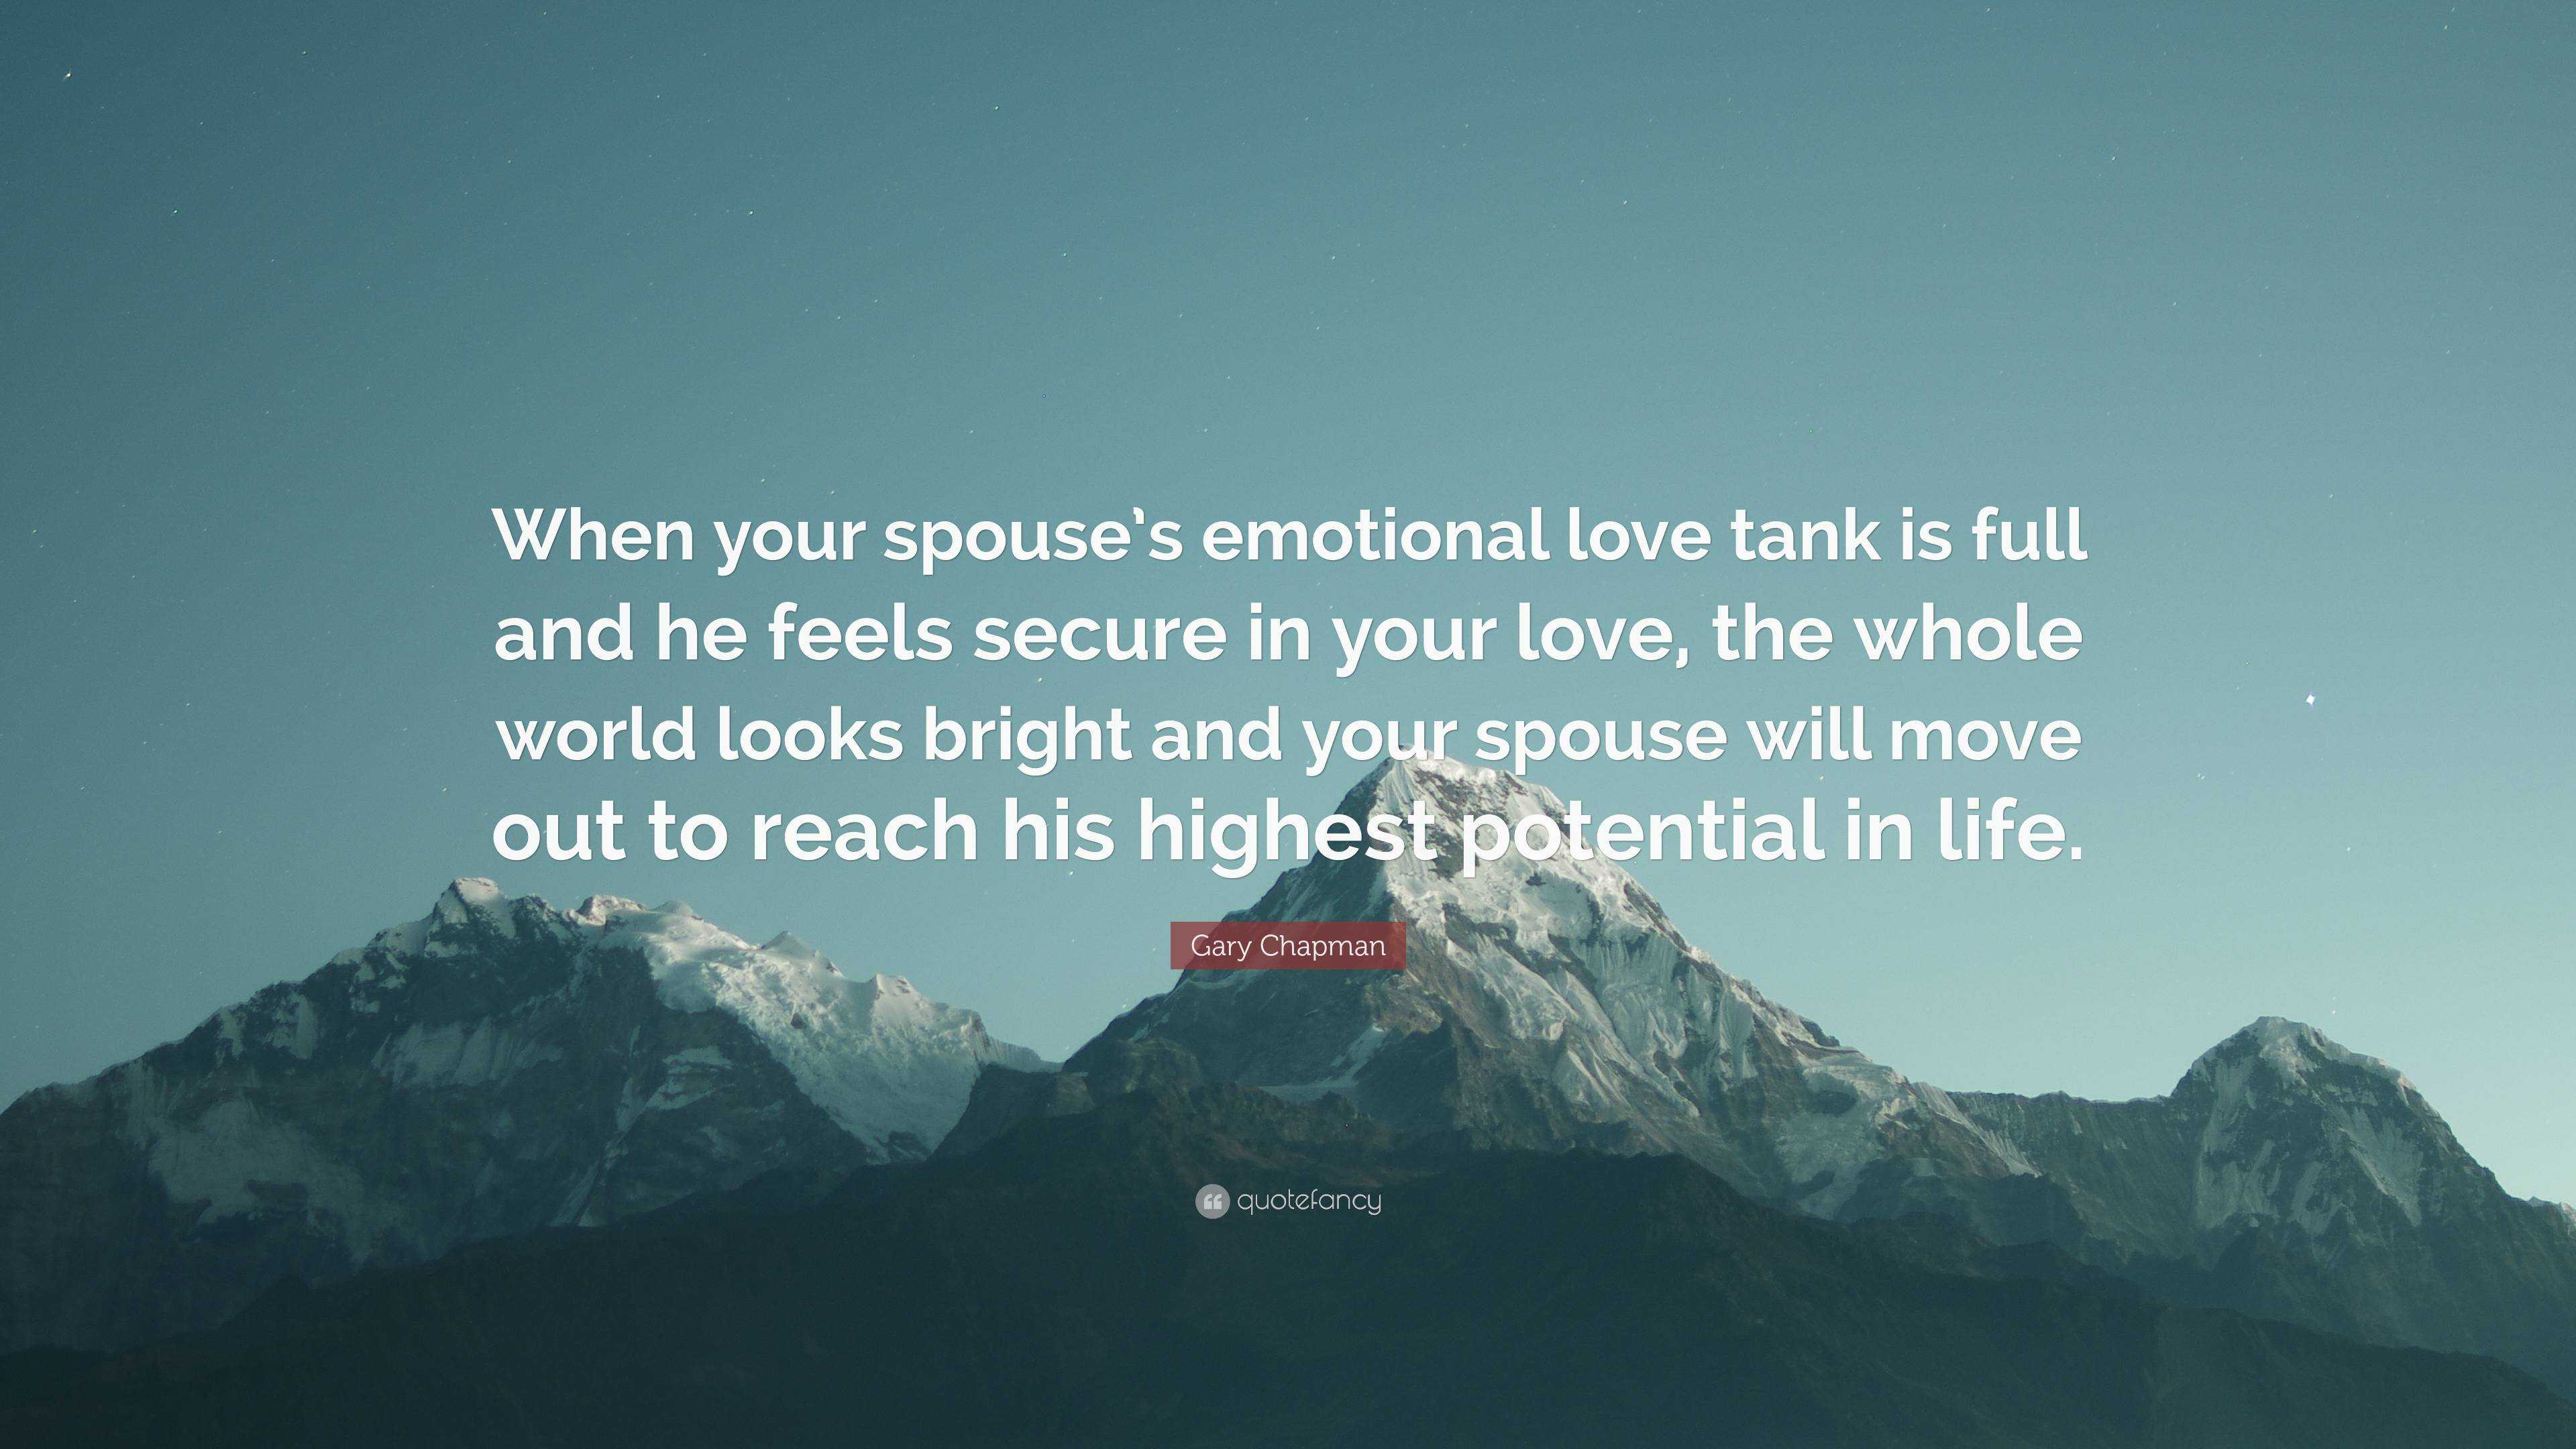 https://quotefancy.com/media/wallpaper/3840x2160/6626007-Gary-Chapman-Quote-When-your-spouse-s-emotional-love-tank-is-full.jpg